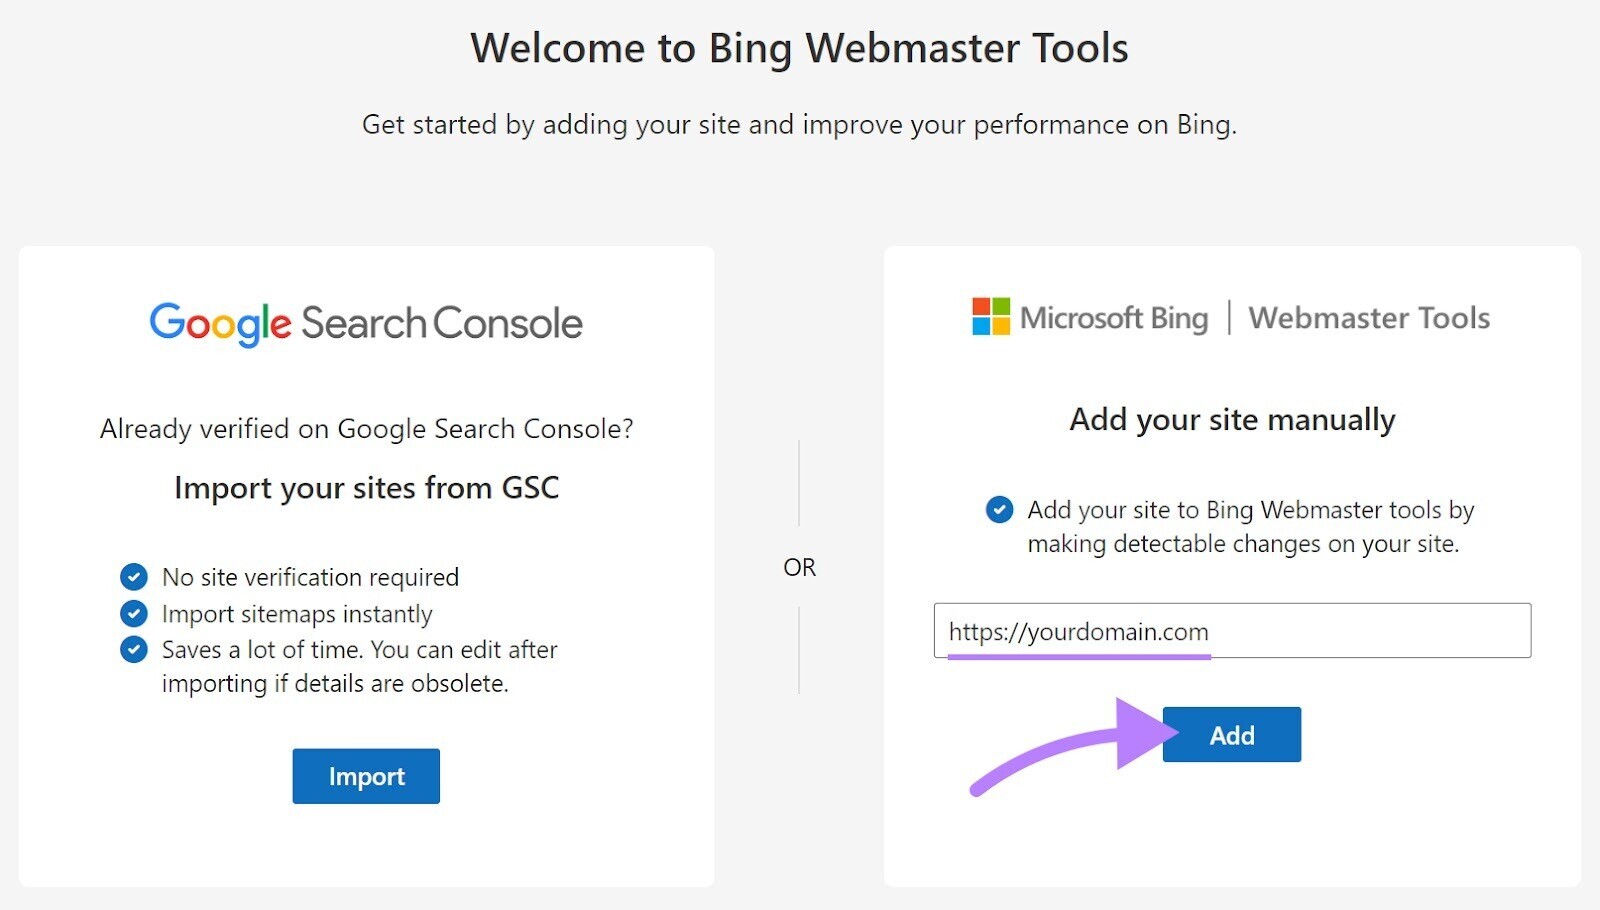 "Welcome to Bing Webmaster Tools" window